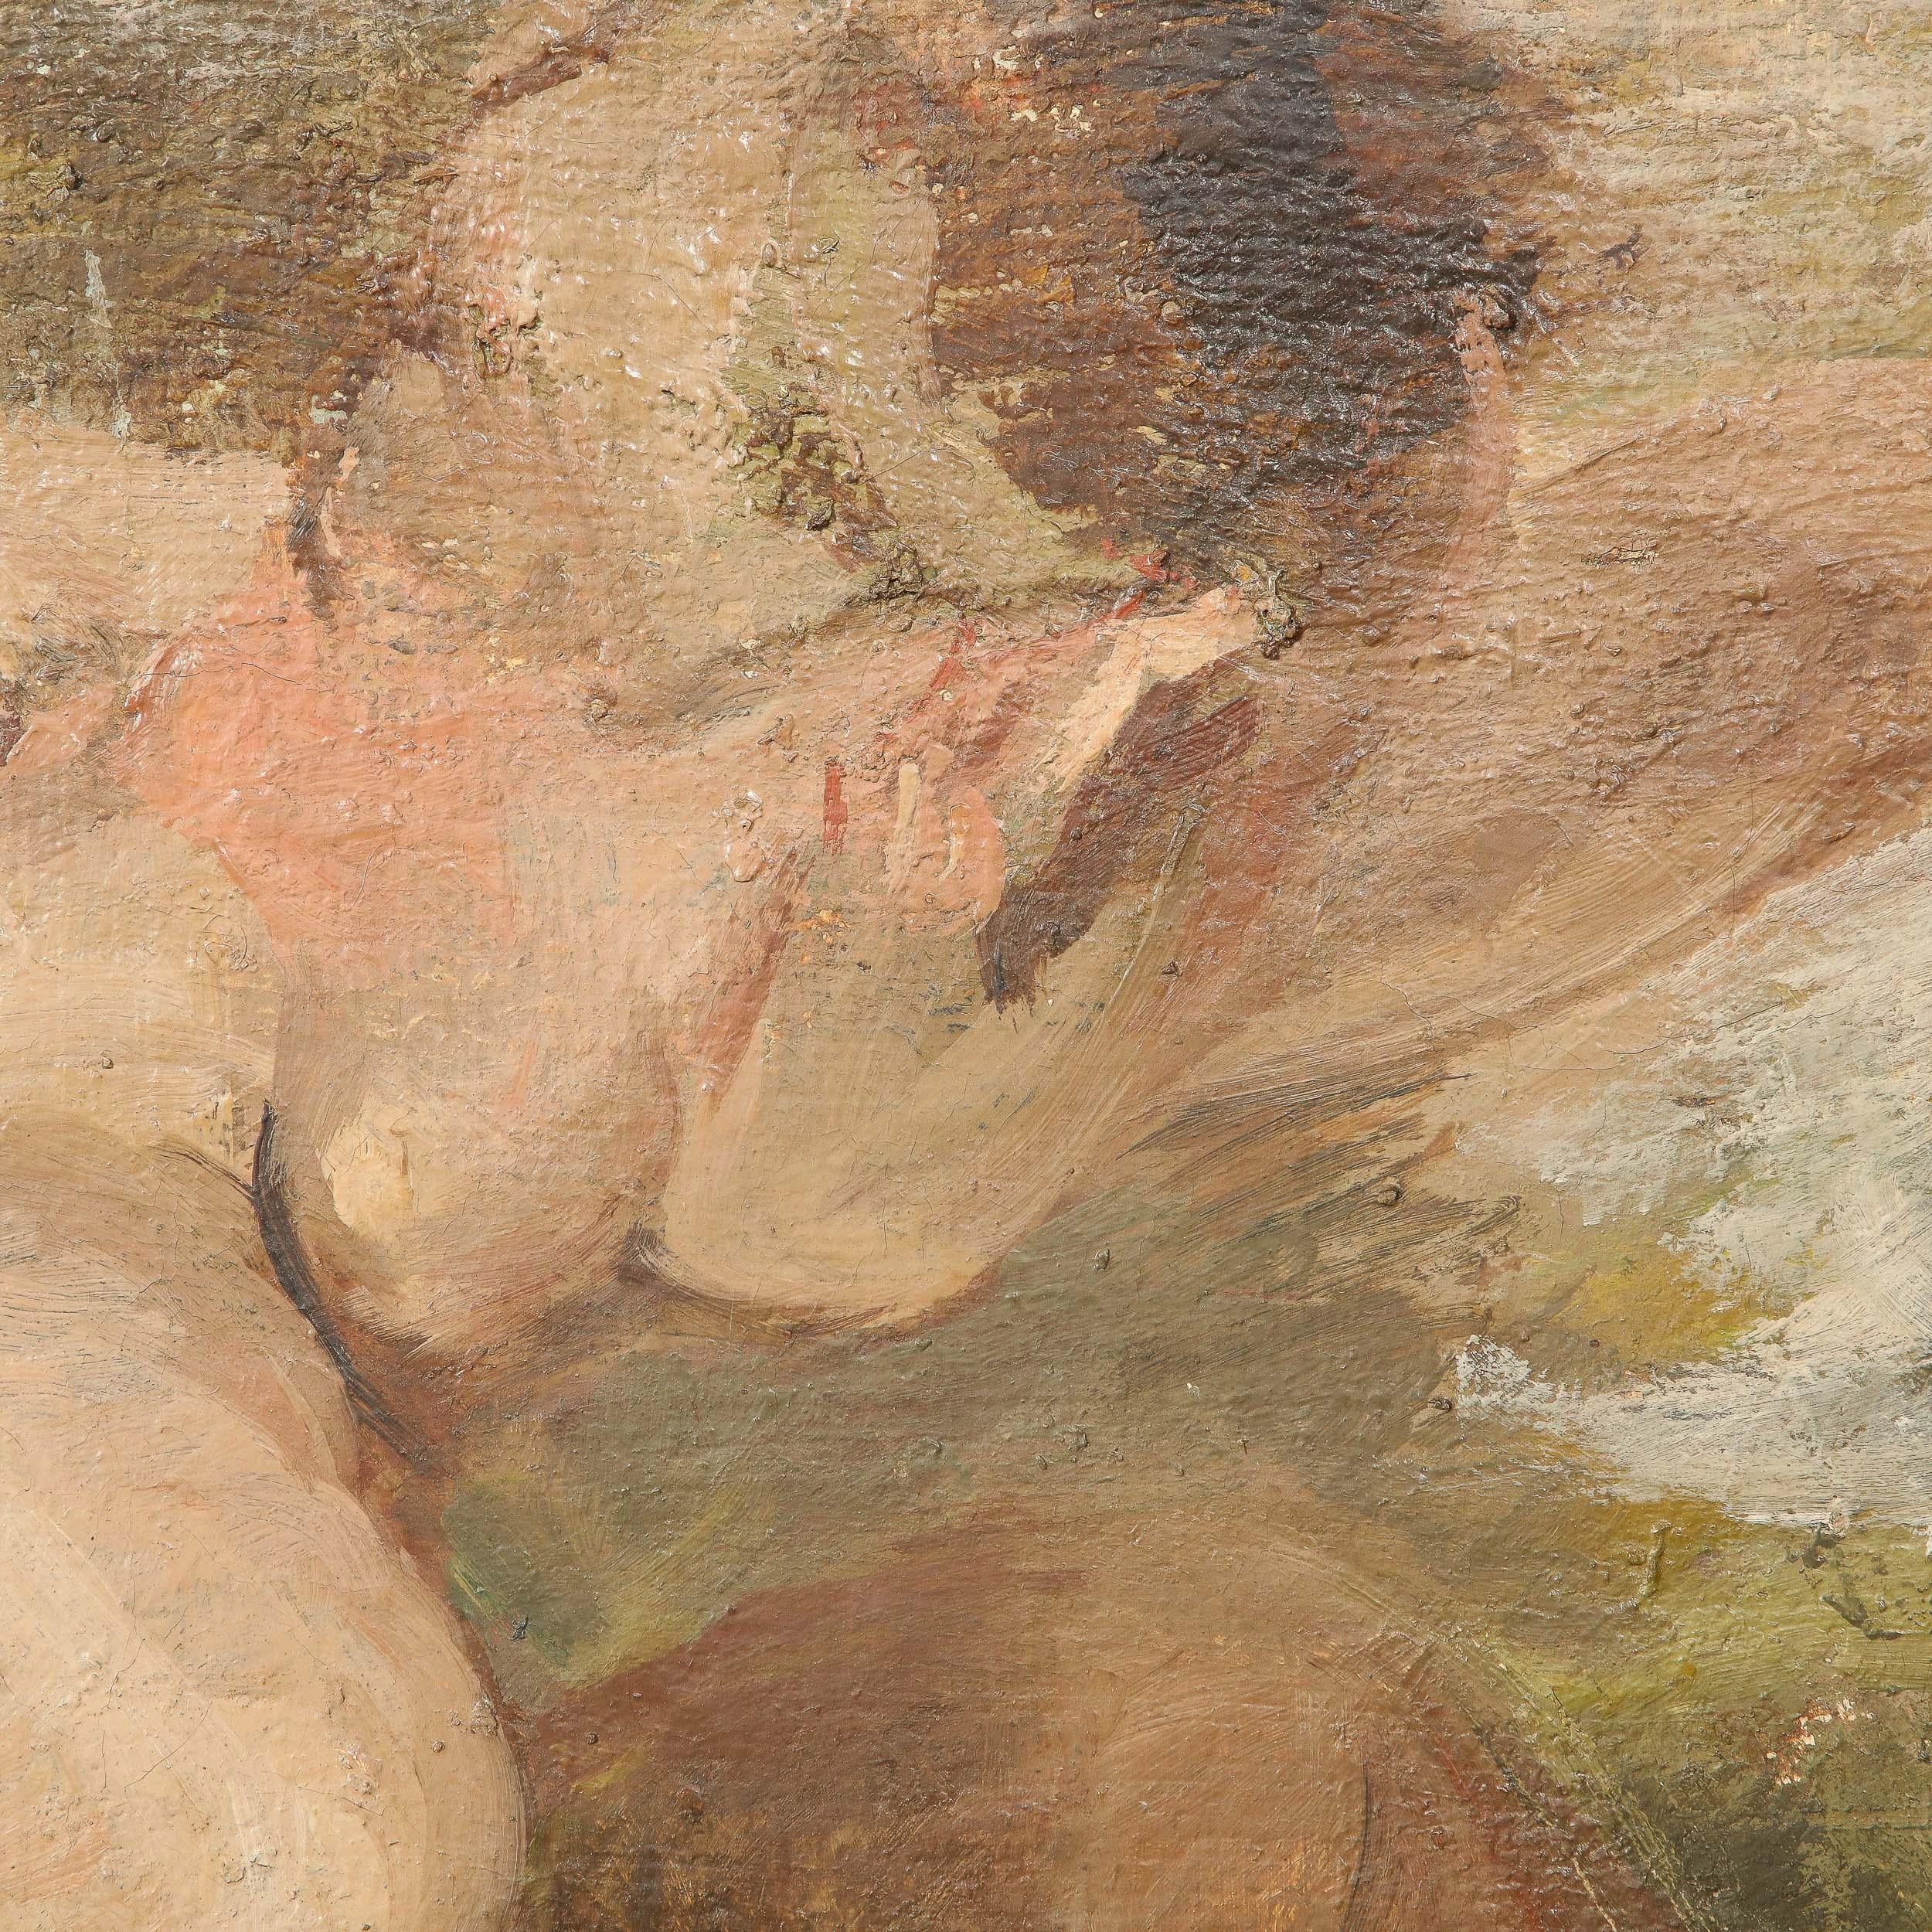 Romanticist Oil on Burlap Painting of a Nude Male Figure Bathing in a River  For Sale 2